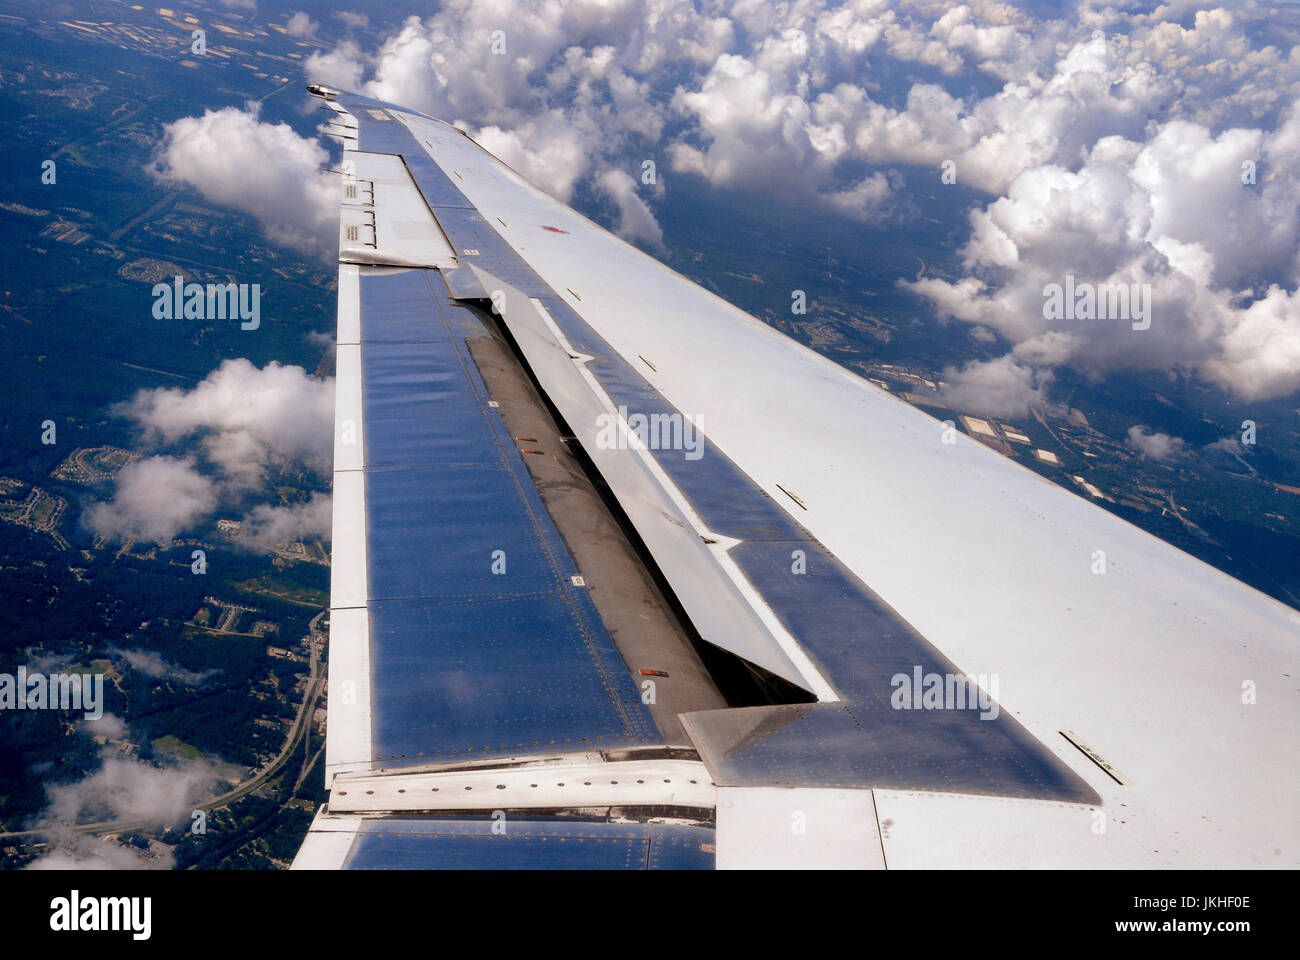 Aileron of a airplane wing during flight Stock Photo